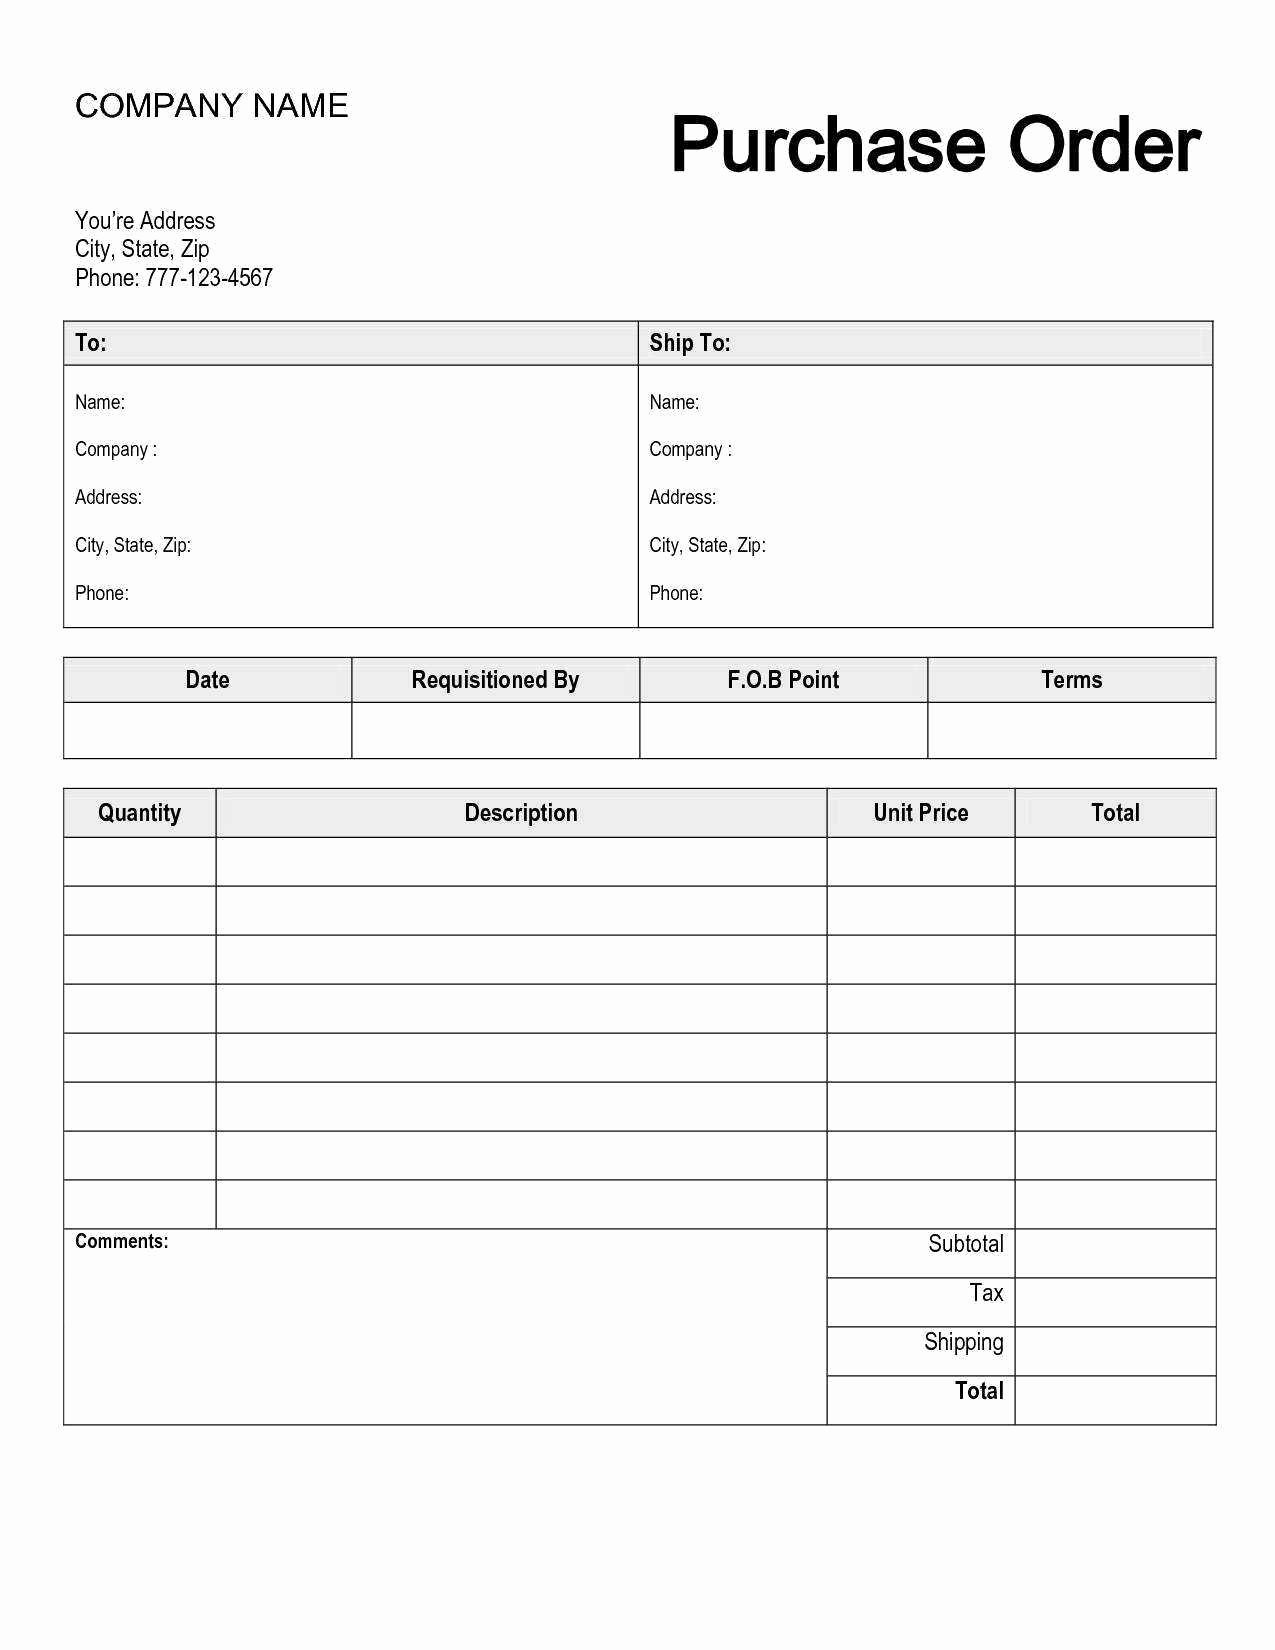 Ordering form Template Excel Fresh Free Purchase order form Template Excel Image – 53